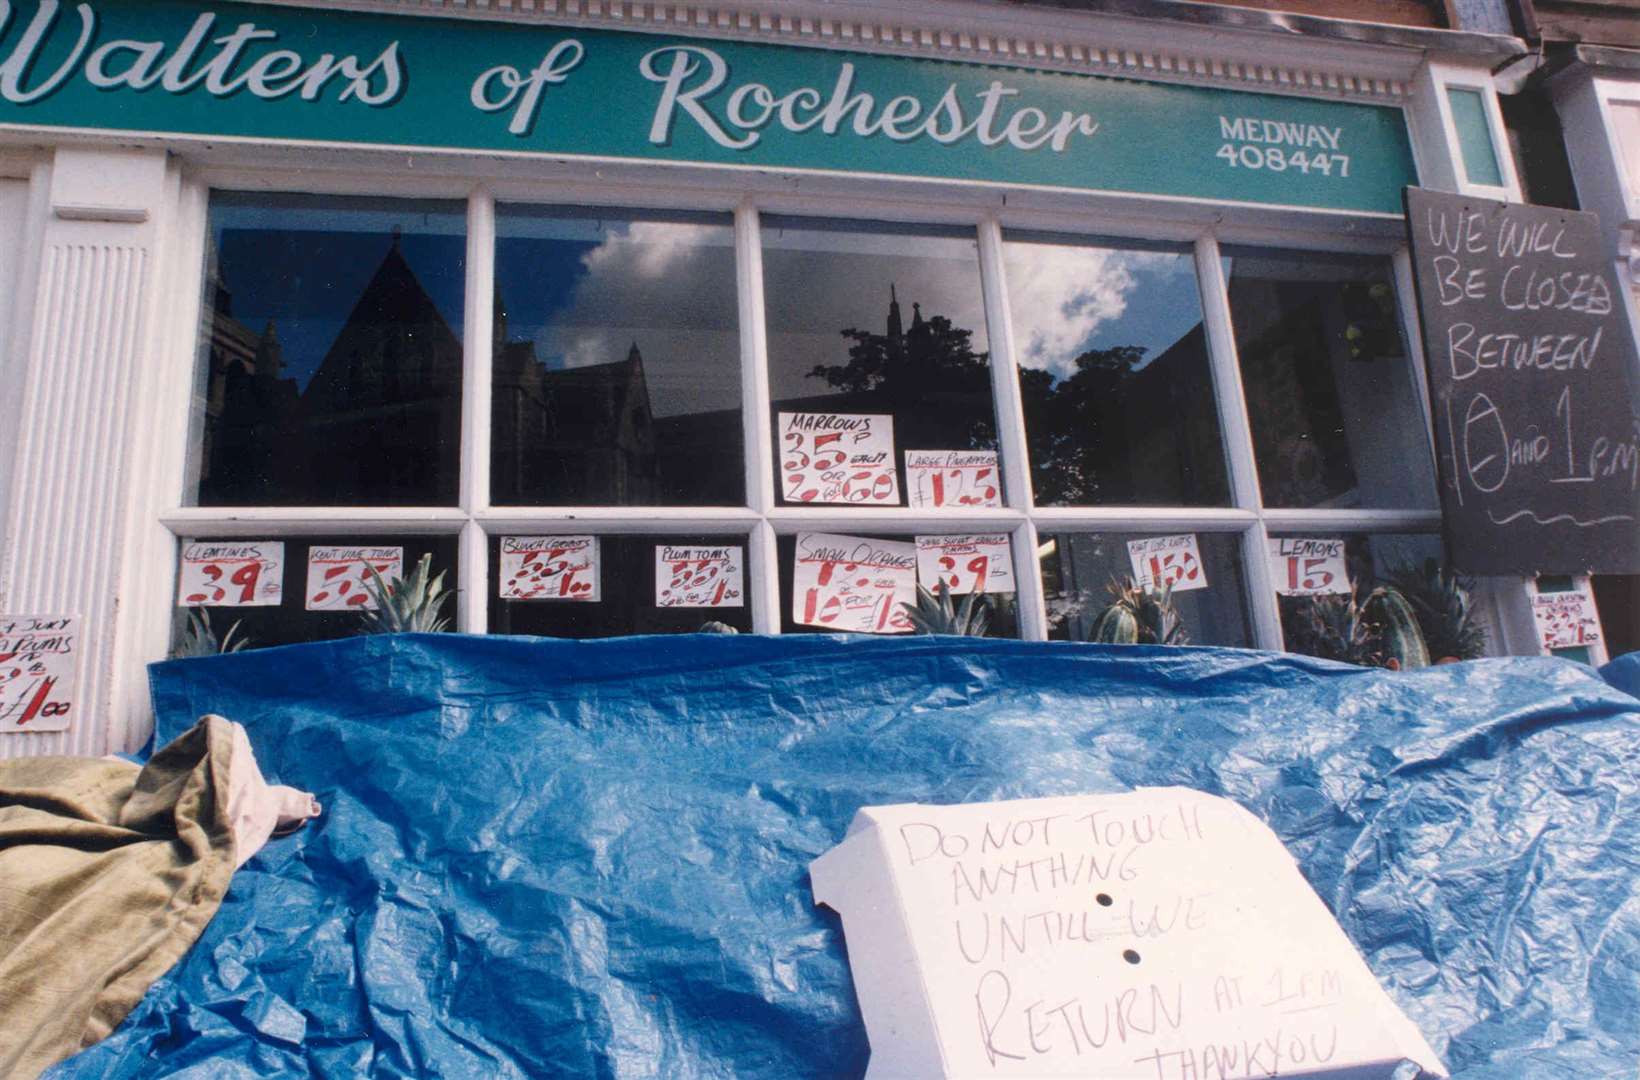 Shop in Rochester closed to pay tribute after the death of Diana in 1997